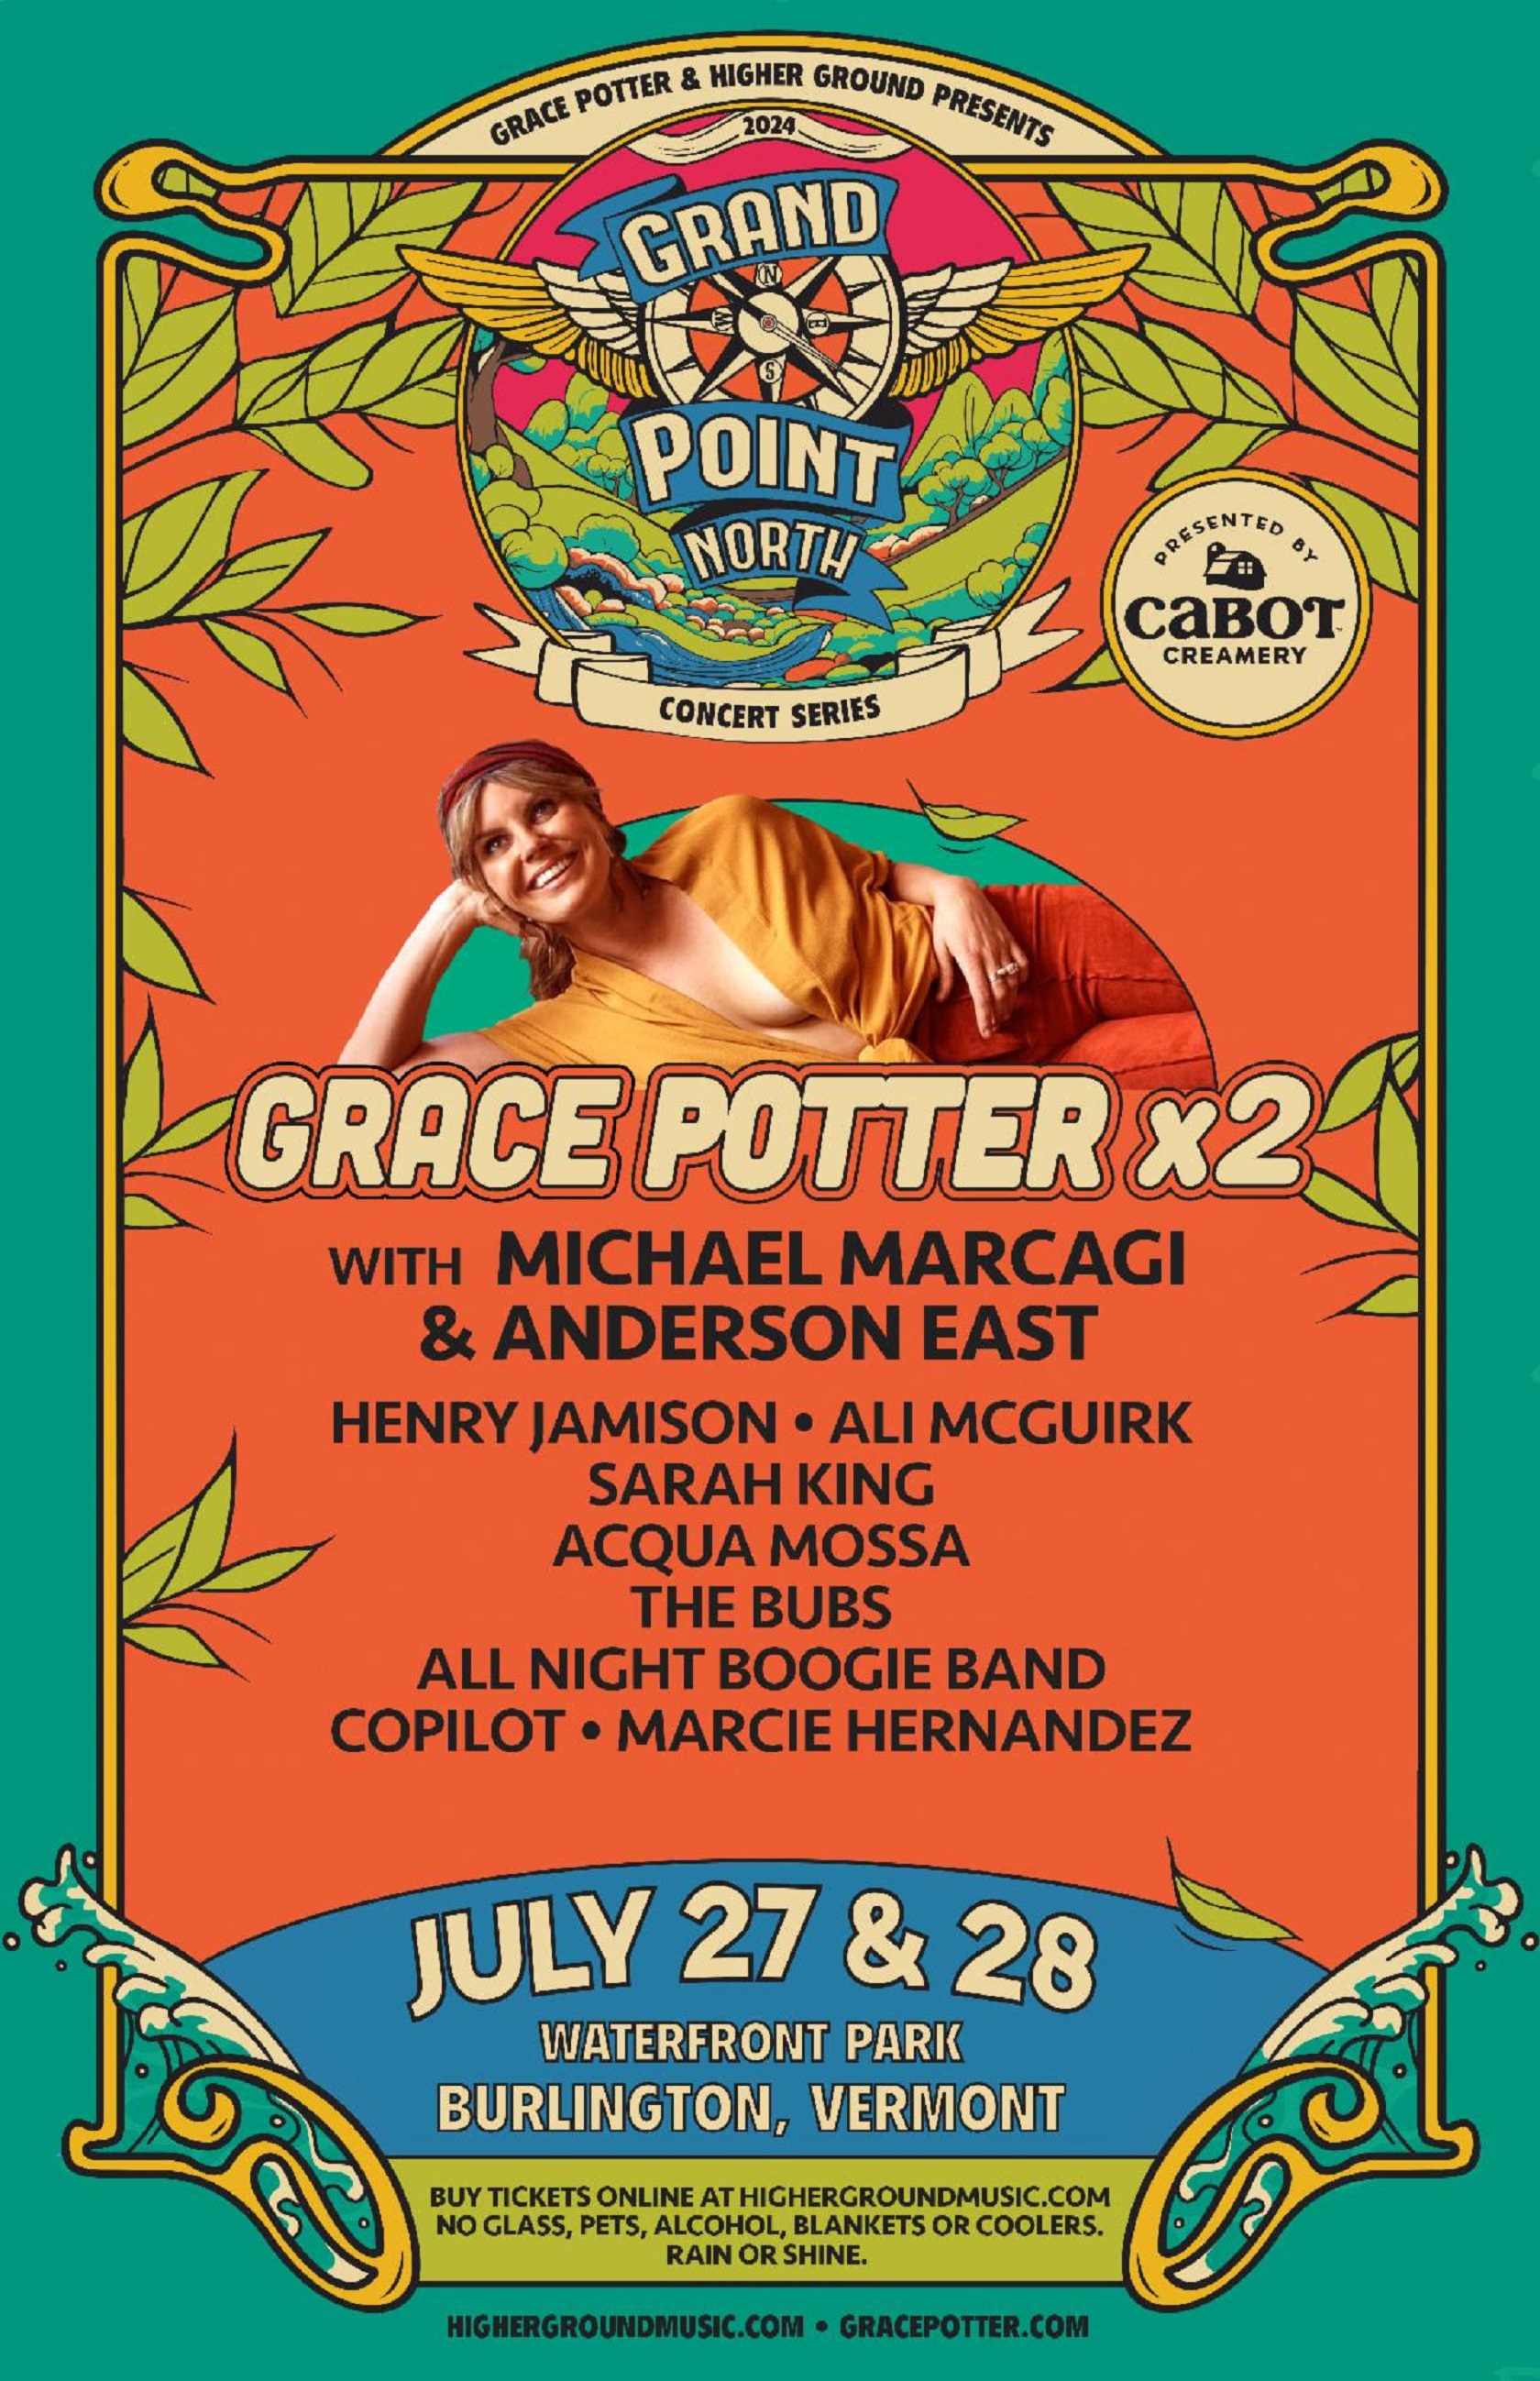 Grace Potter's Grand Point North to Serve as a Benefit for the Vermont Community